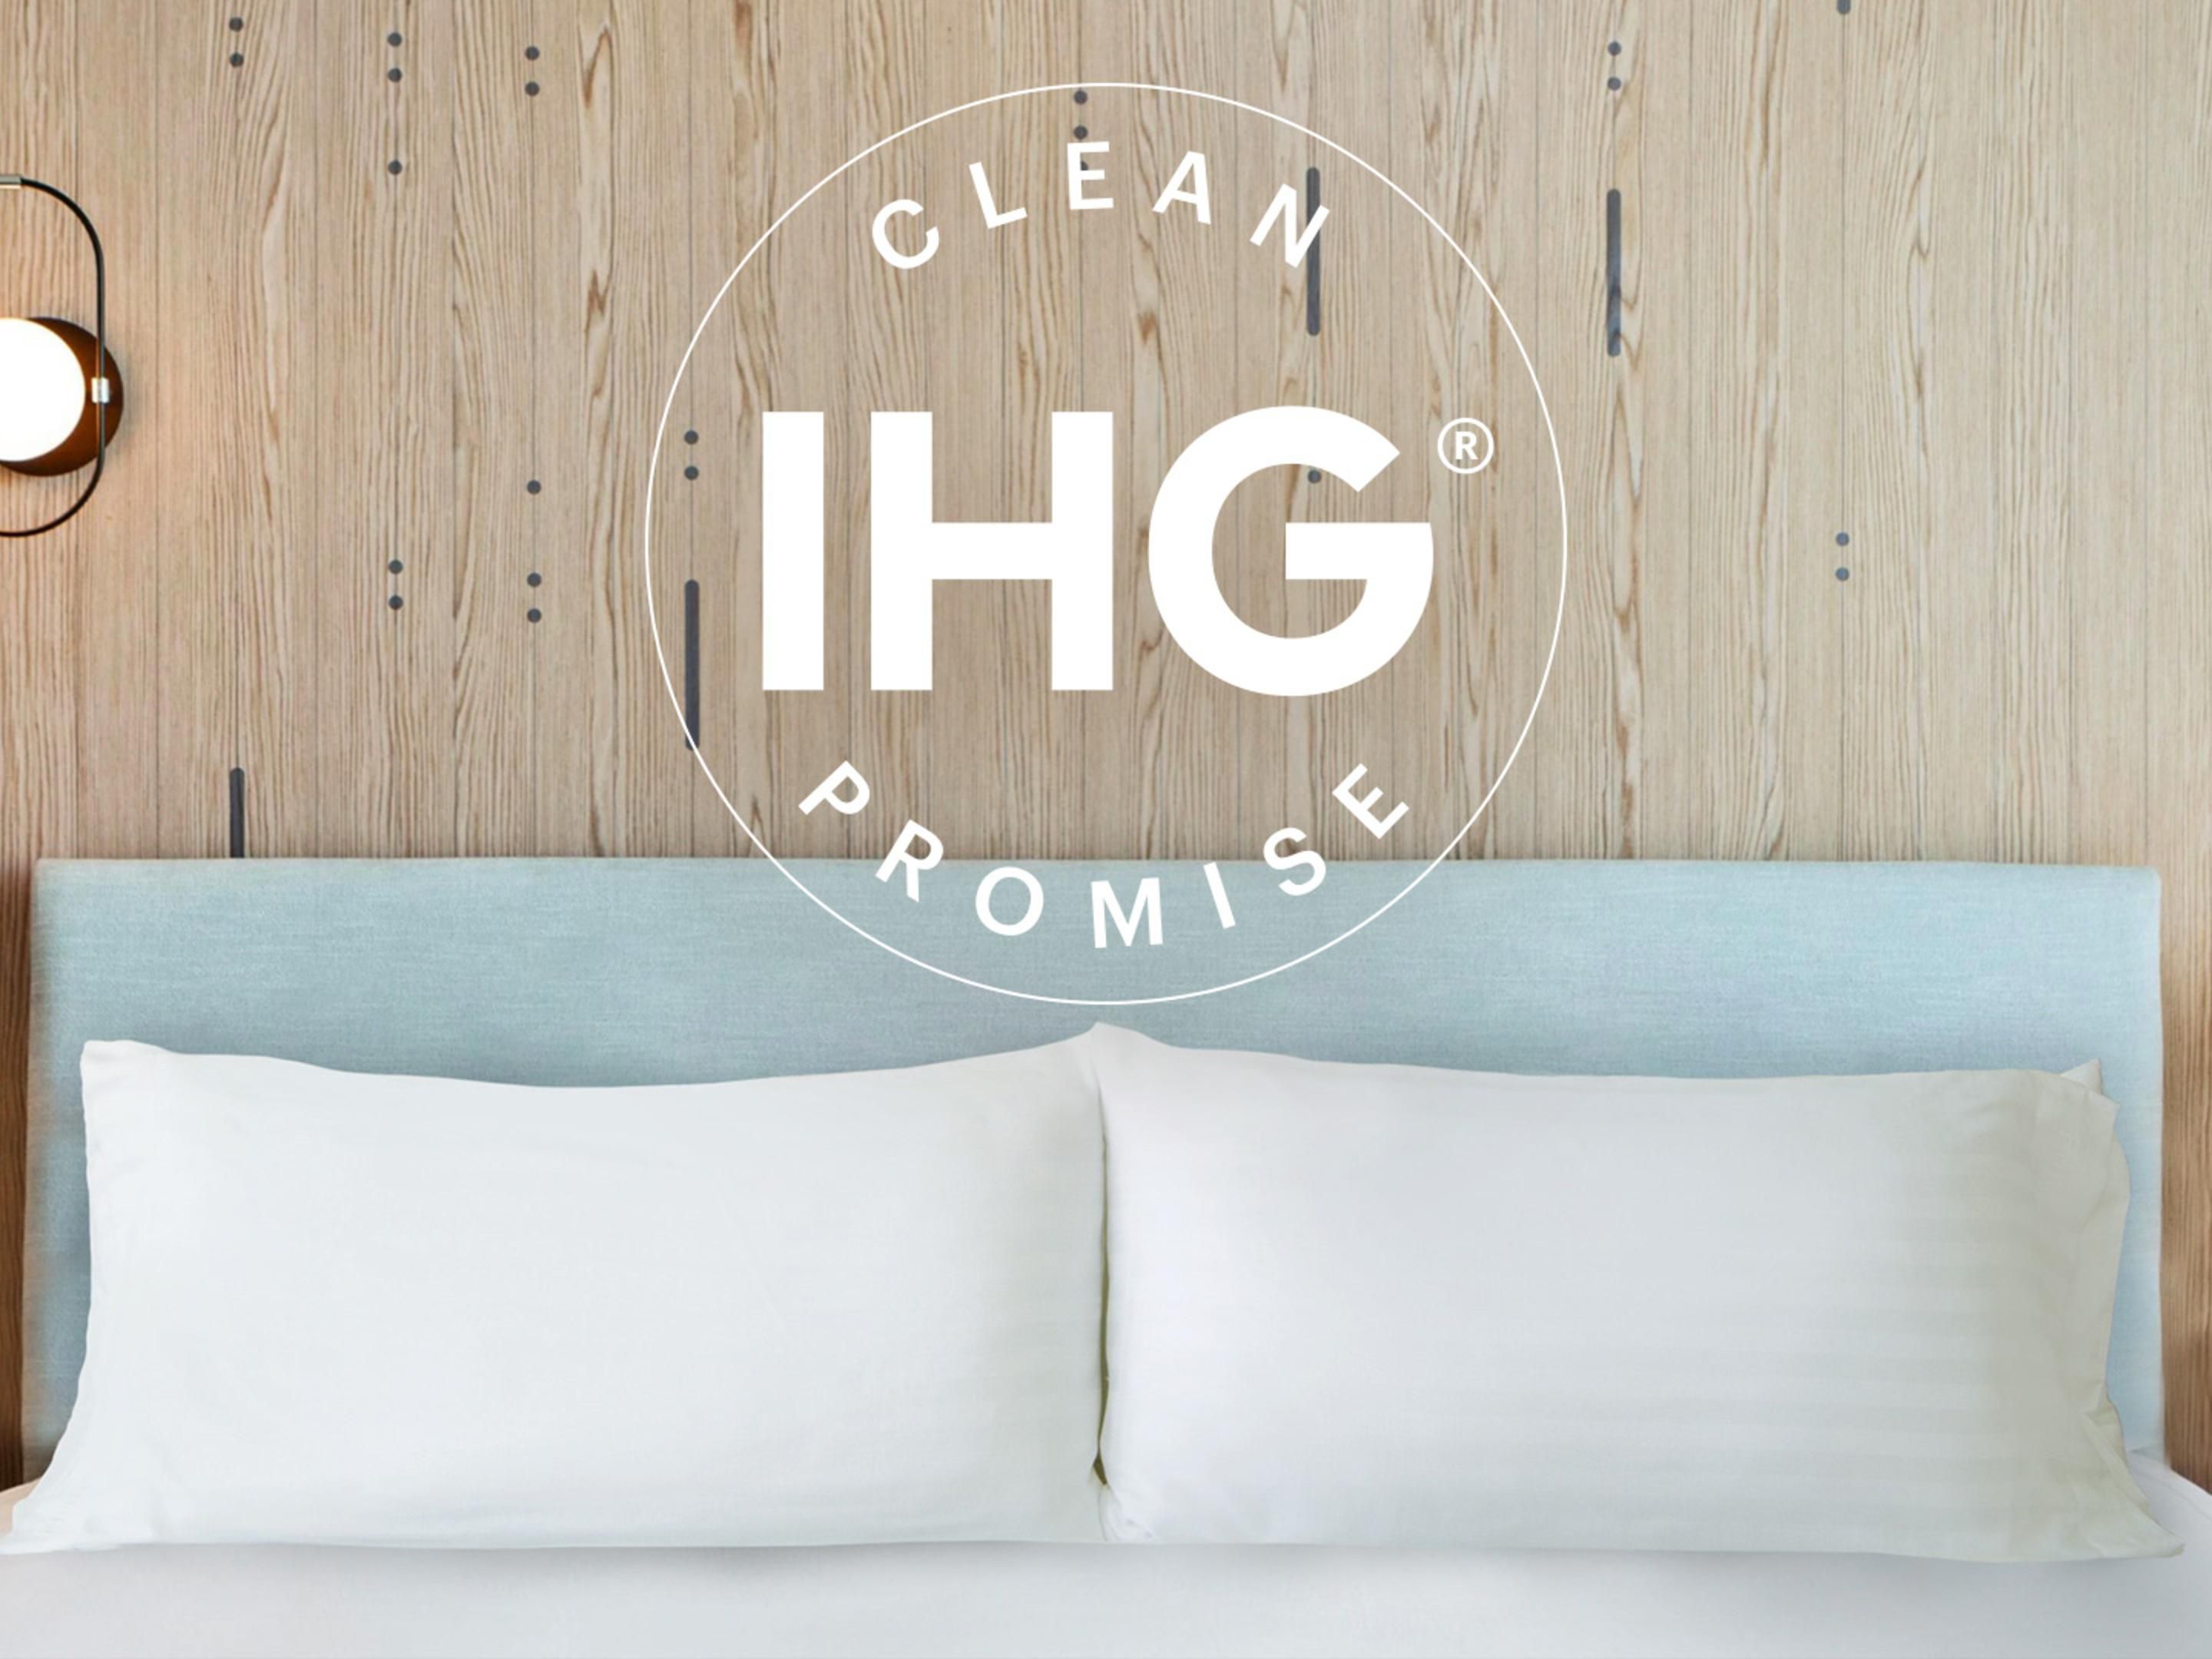 IHG has a long-standing commitment to rigorous cleaning procedures. This IHG Way of Clean program is now being expanded with additional COVID-19 protocols and best practices. 